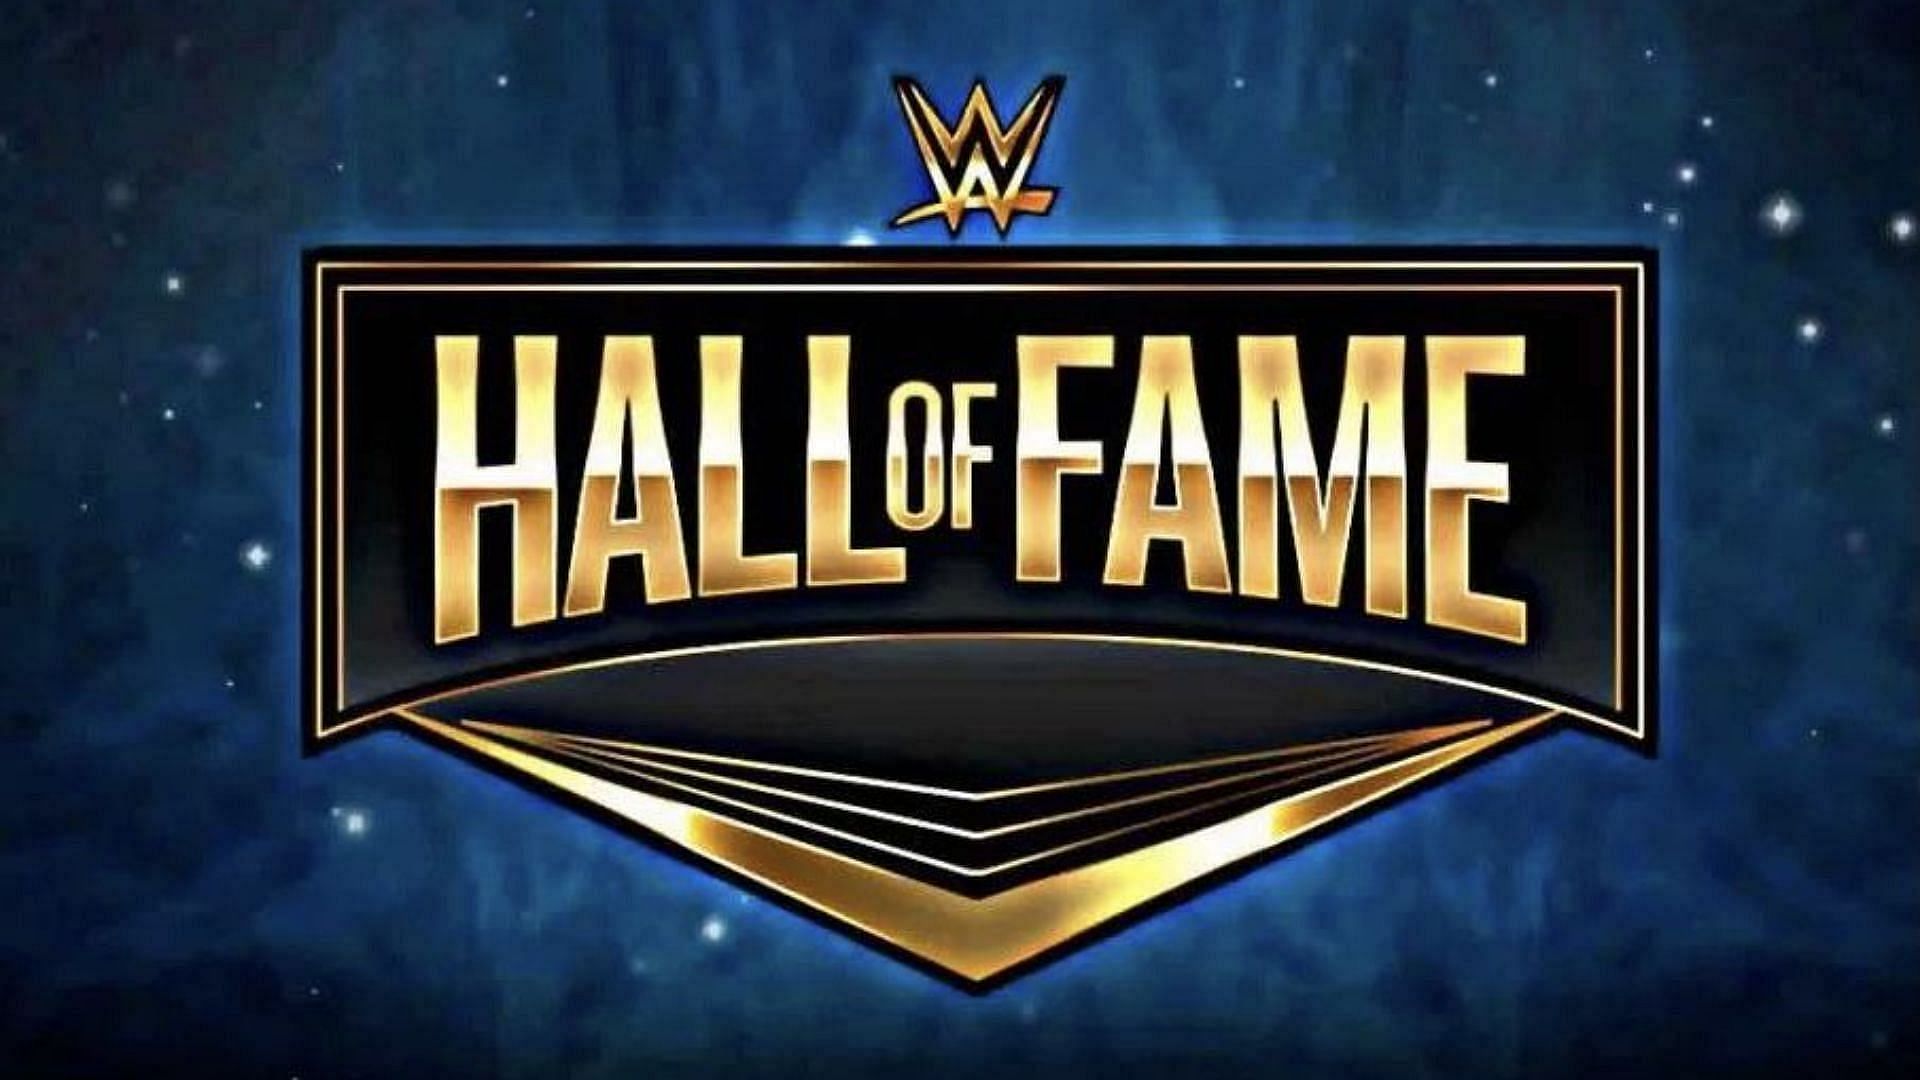 WWE legend yet to get inducted into the Hall of Fame